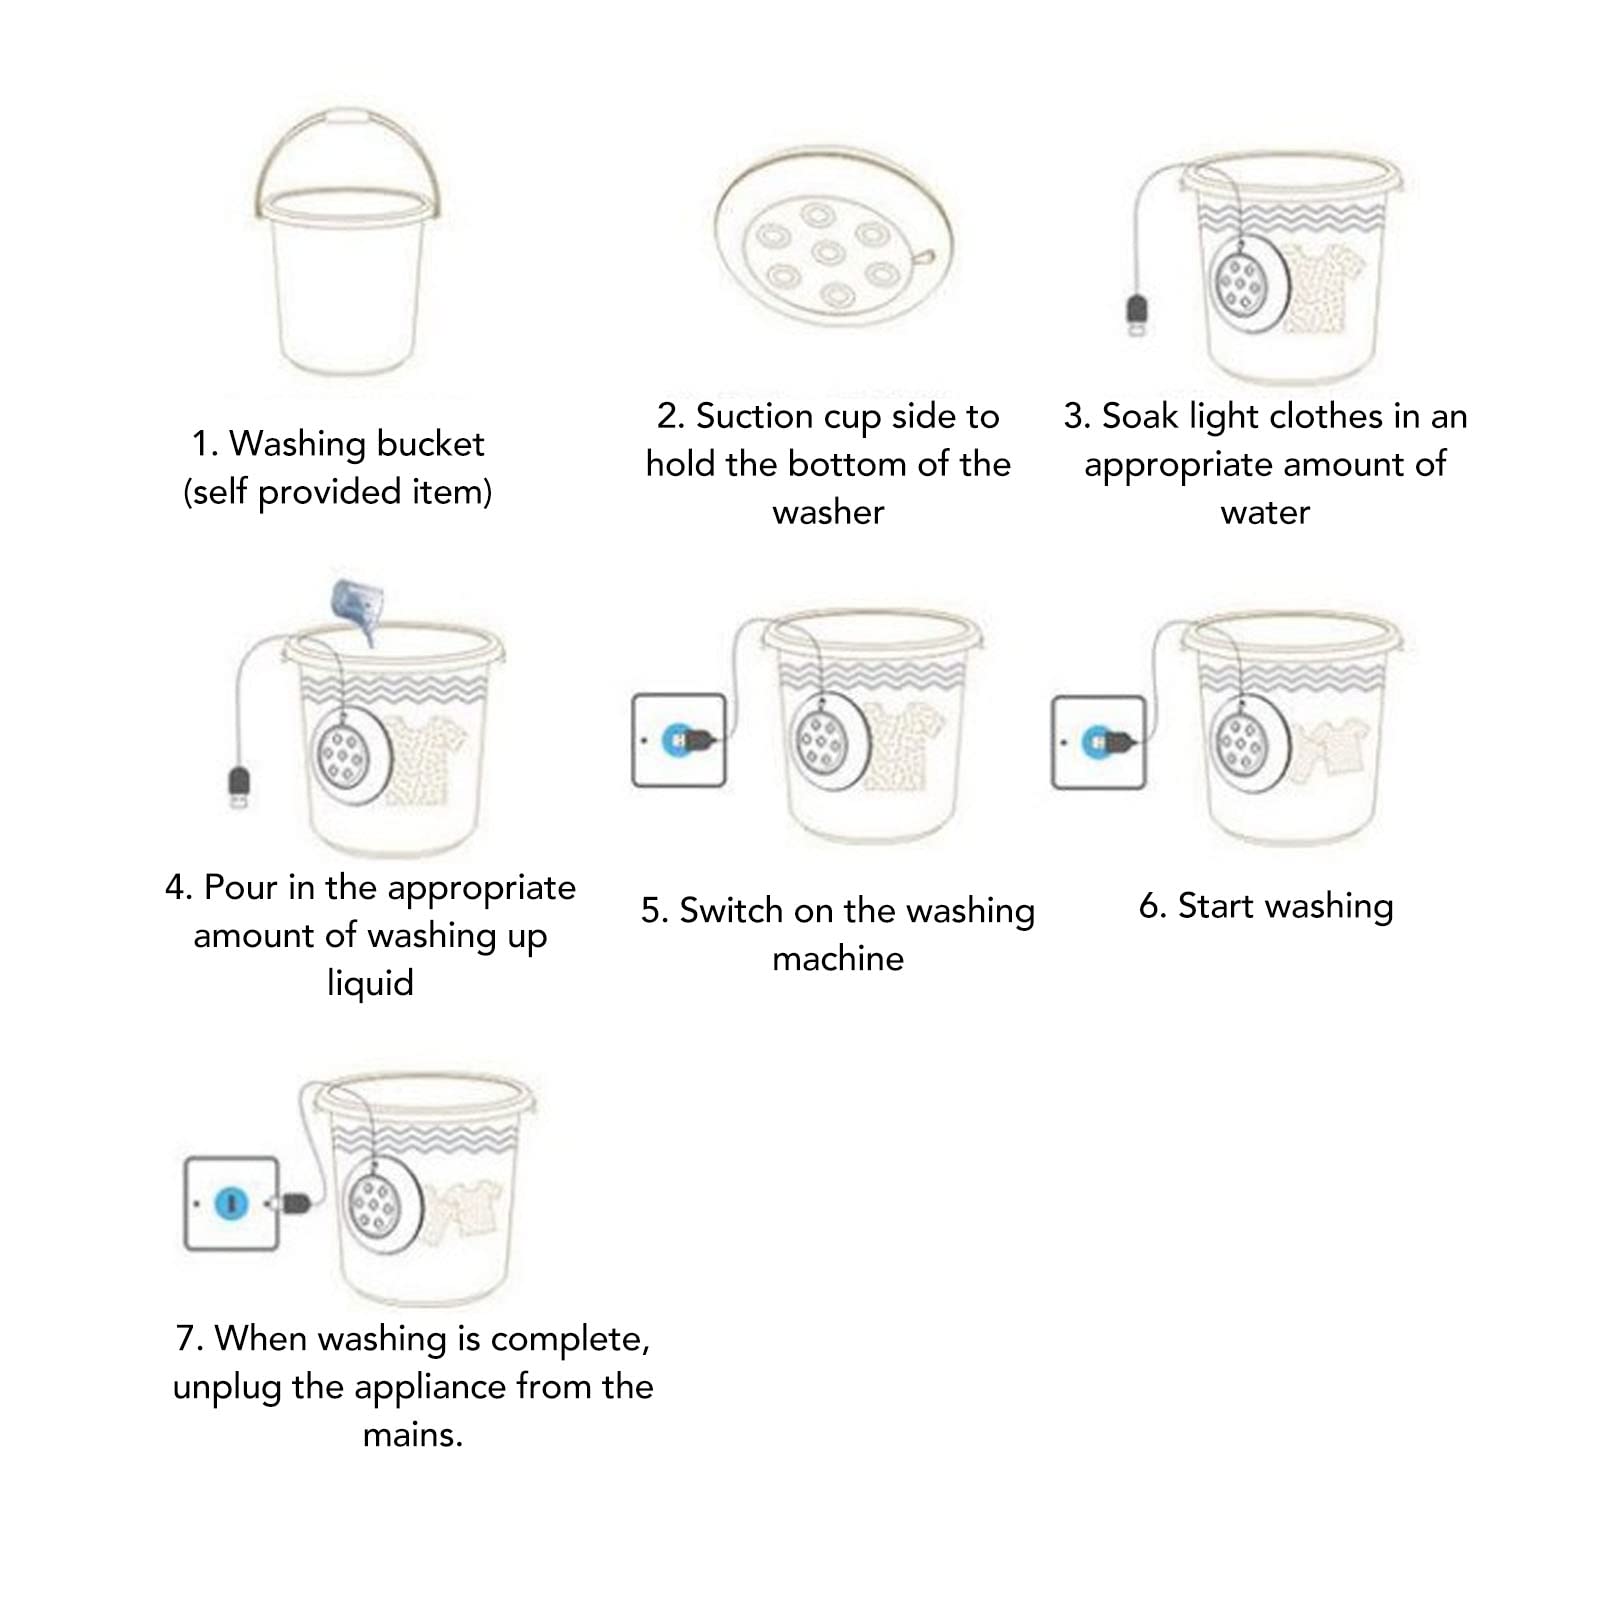 Mini Washing Machine, Portable Ultrasonic Turbine Washer Foldable Design Automatic Cycle with USB Power, Suitable for College Rooms, Travel, Home and Apartment